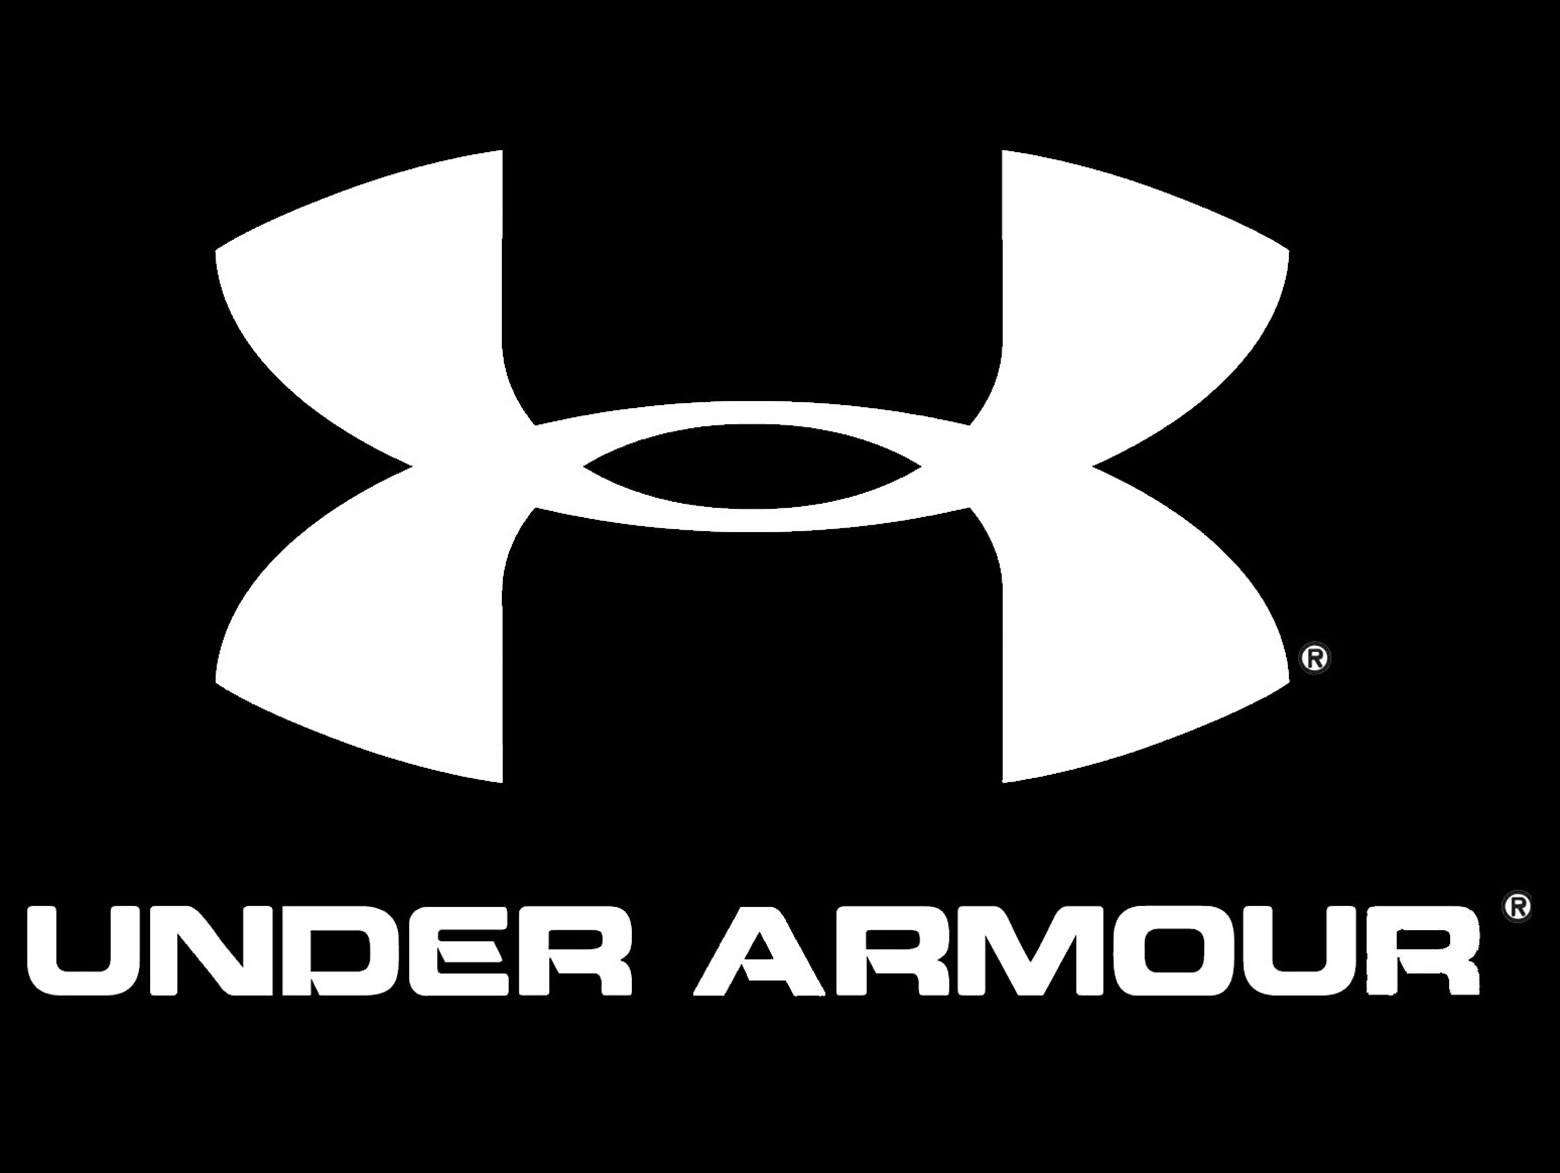 Under Armour, Inc. ($UA) Stock | Company Gaps Up On Positive Earnings Guidance Numbers - Warrior Trading News